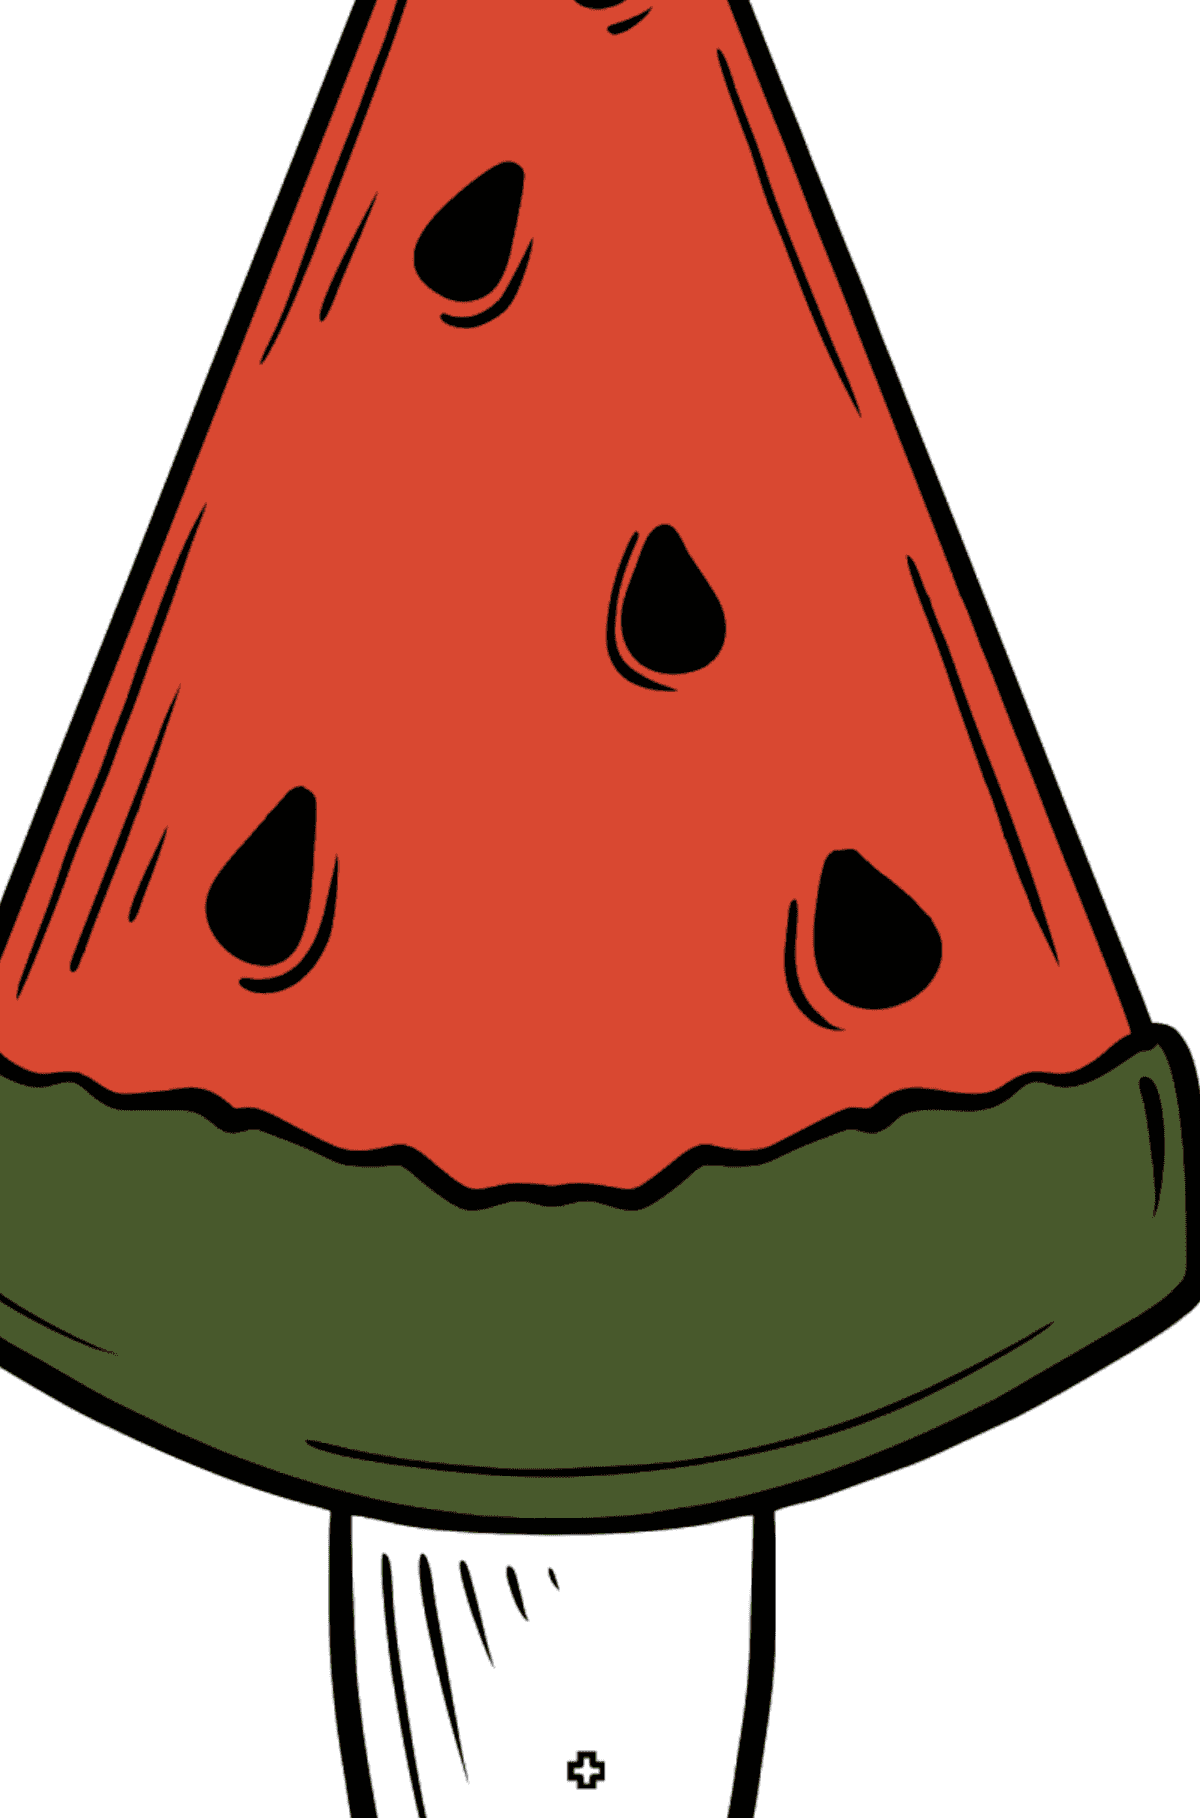 Watermelon Ice Cream Popsicle coloring page - Coloring by Geometric Shapes for Kids